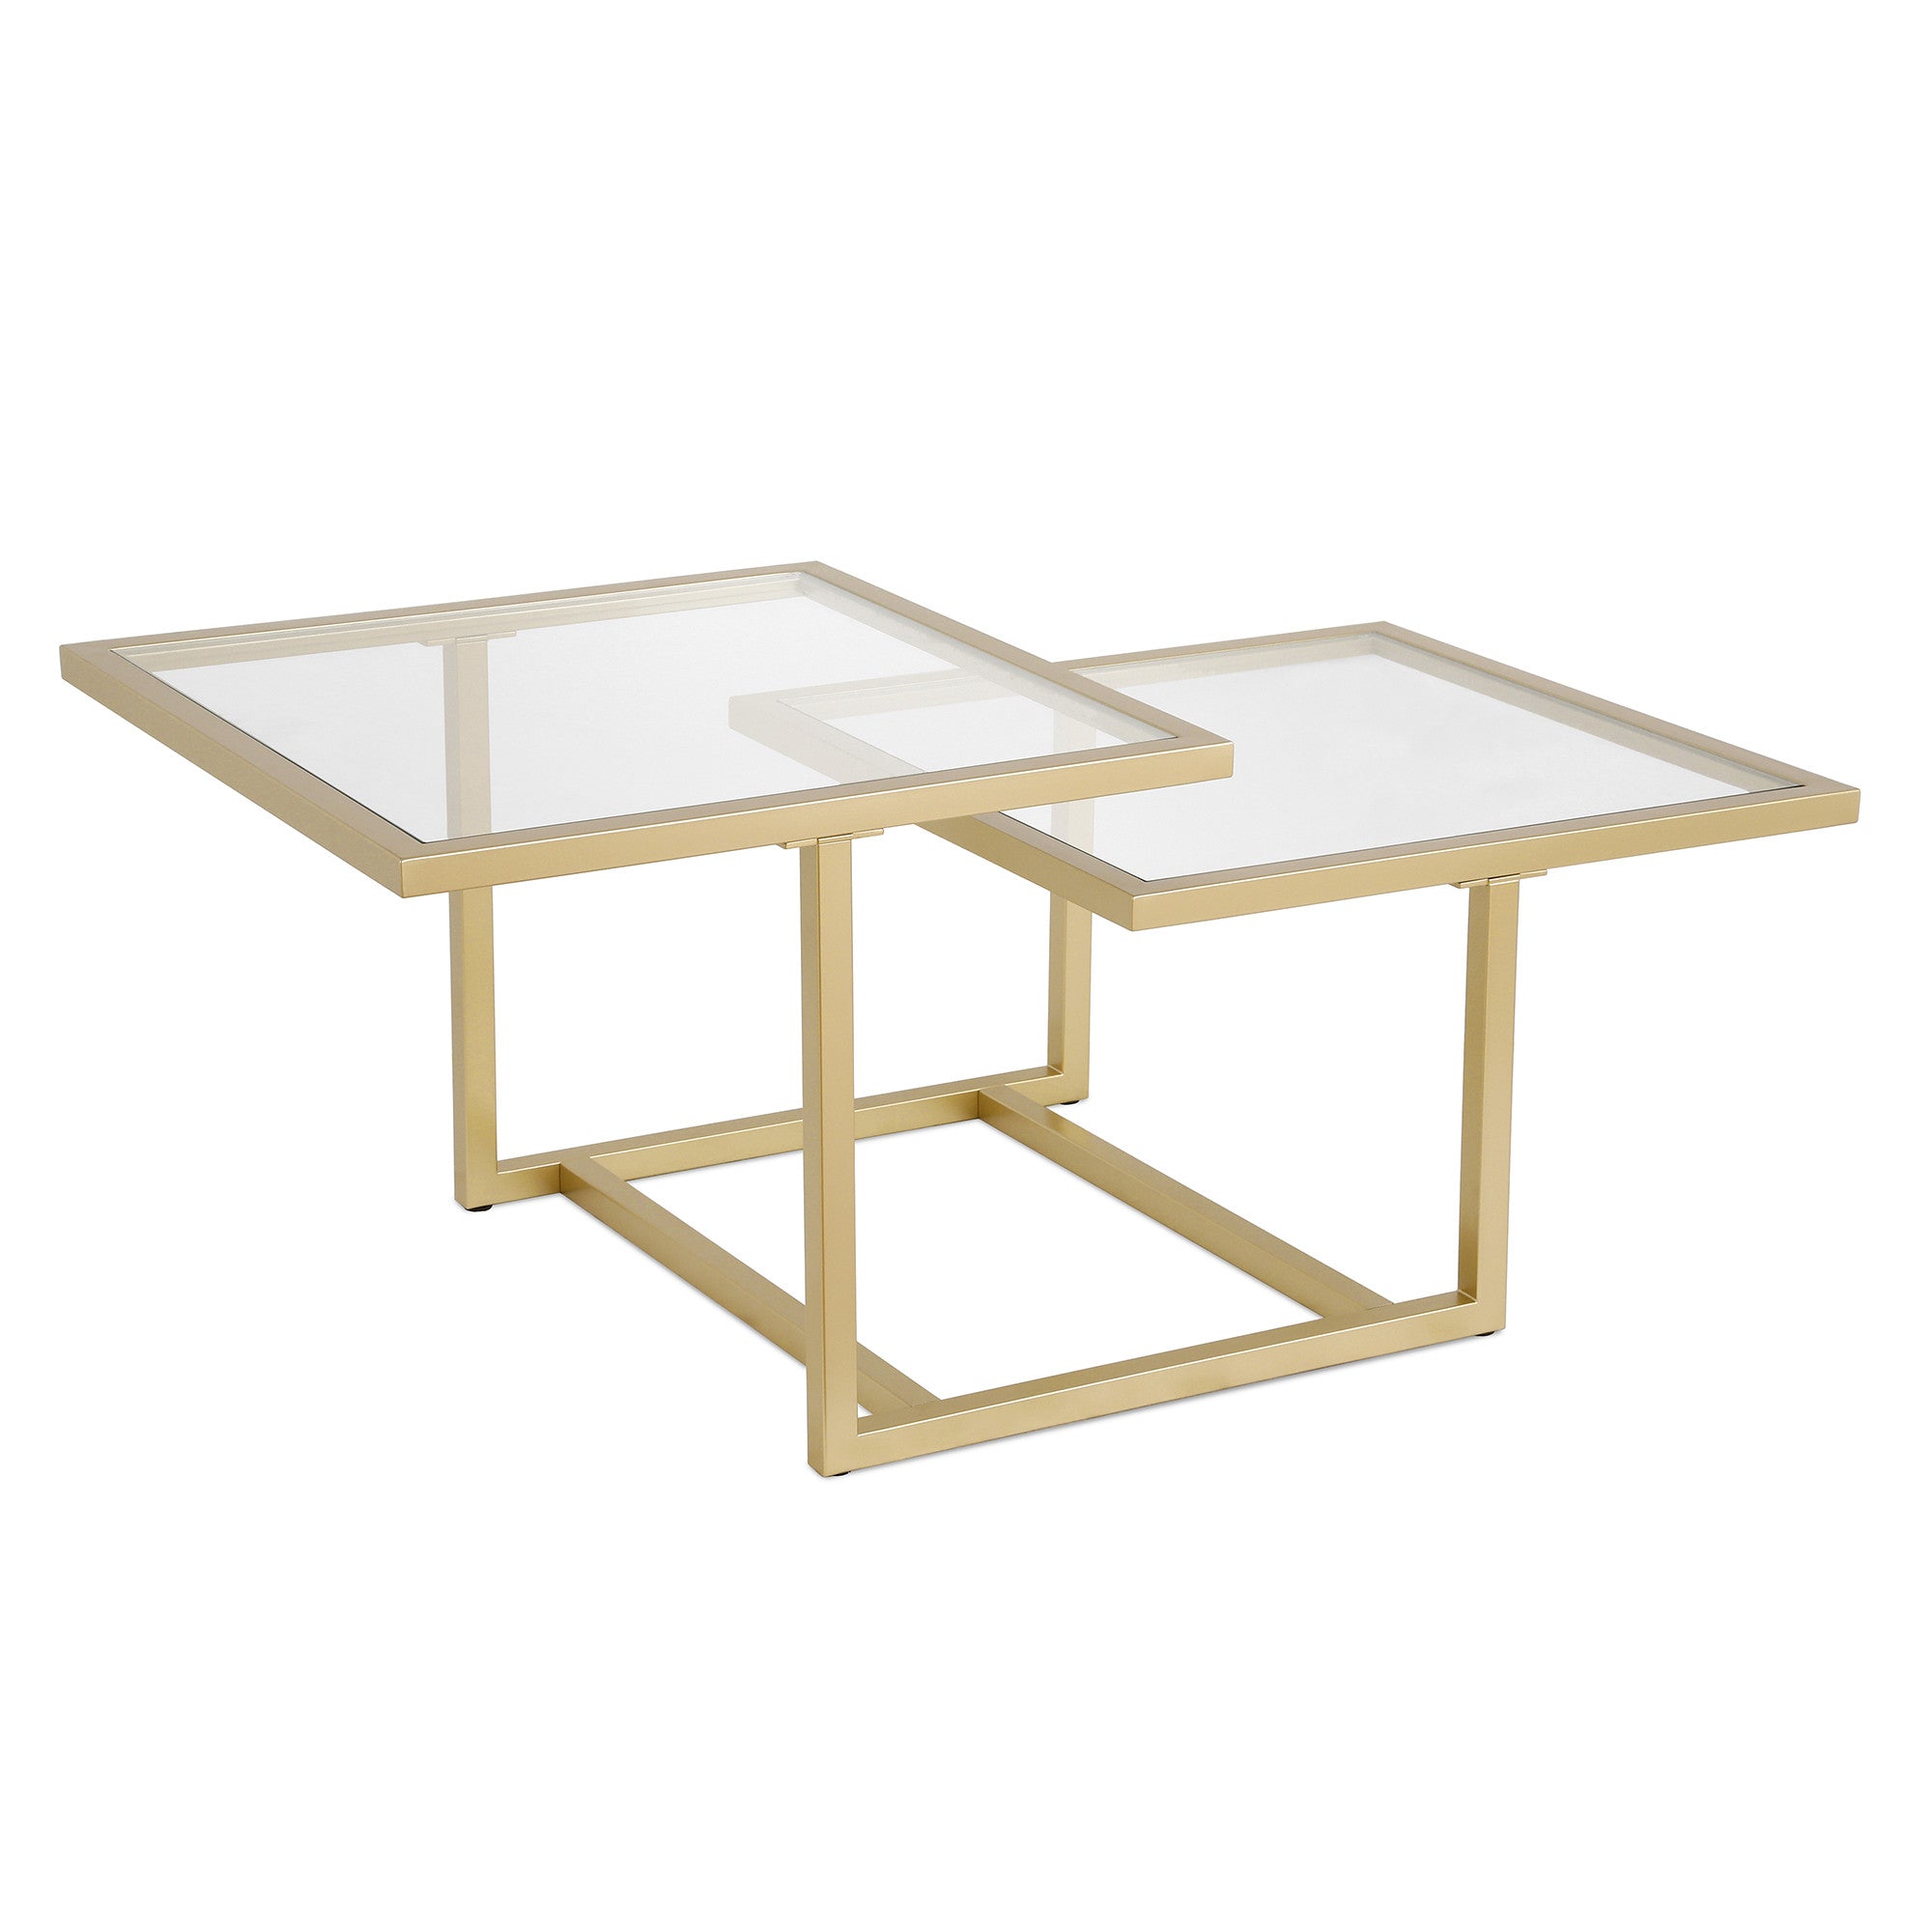 43" Gold Glass And Steel Square Coffee Table With Two Shelves